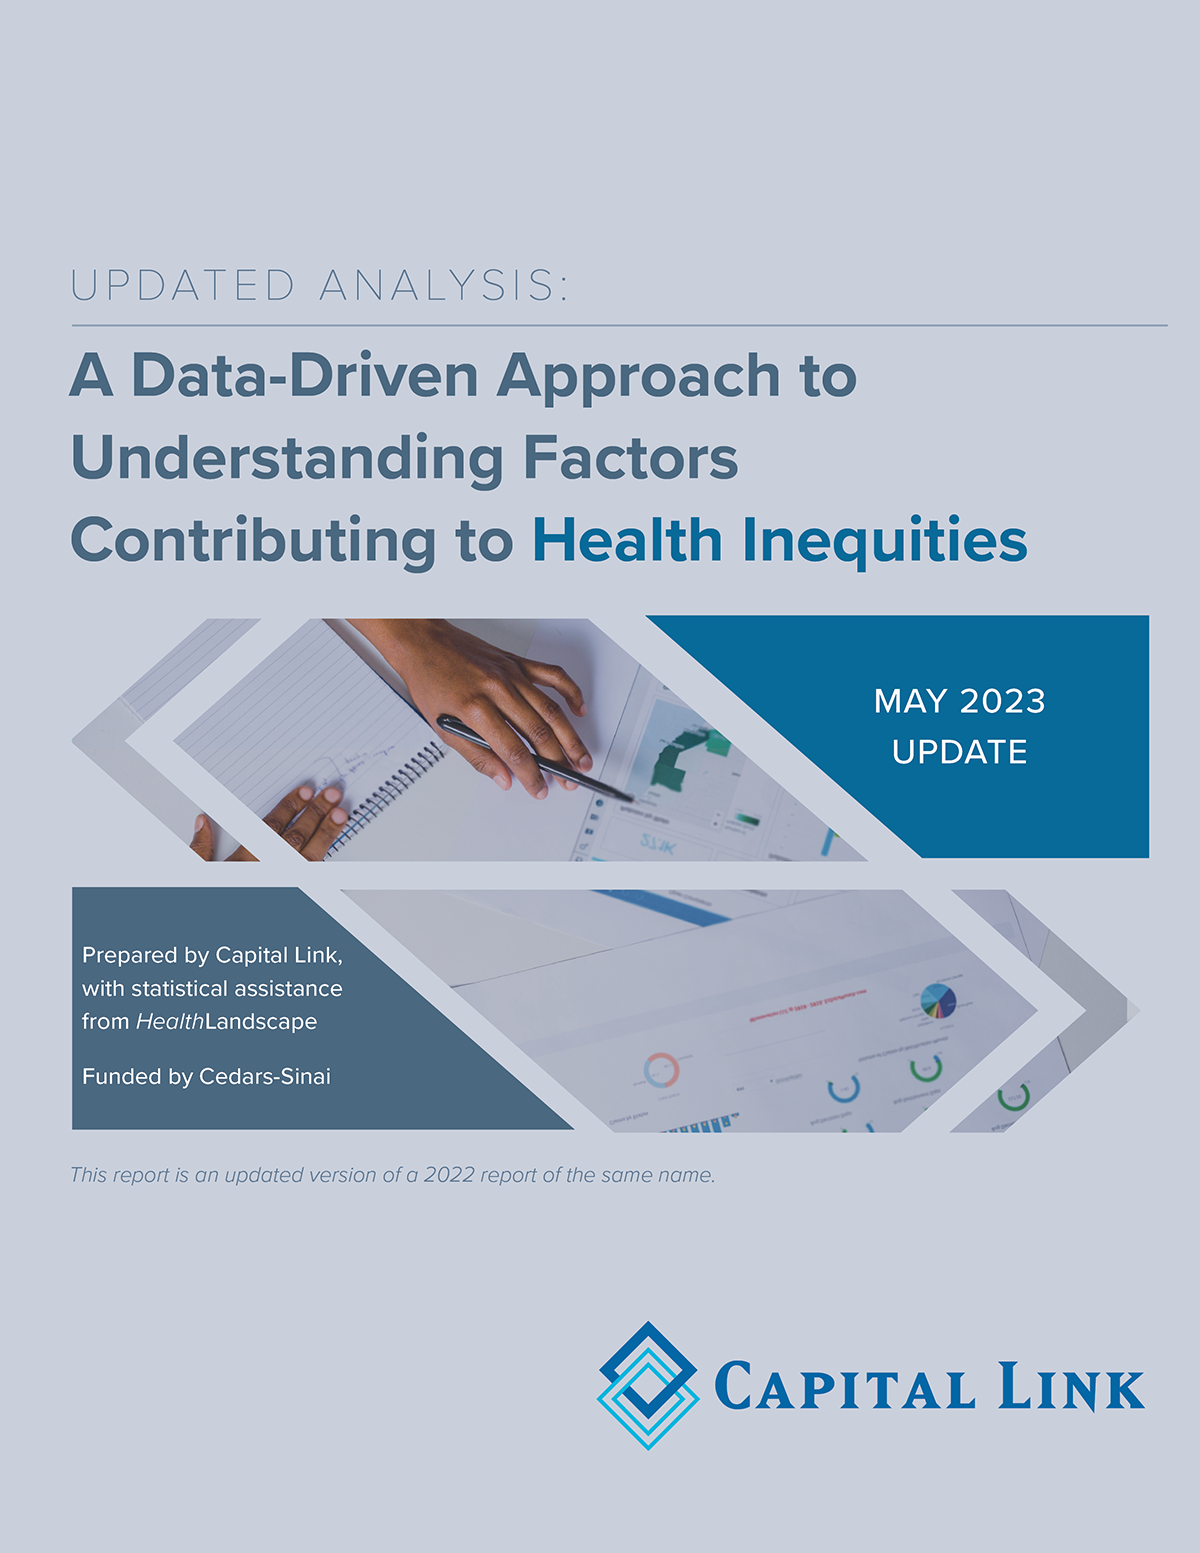 A Data-Driven Approach to Understanding Factors Contributing to Health Inequities